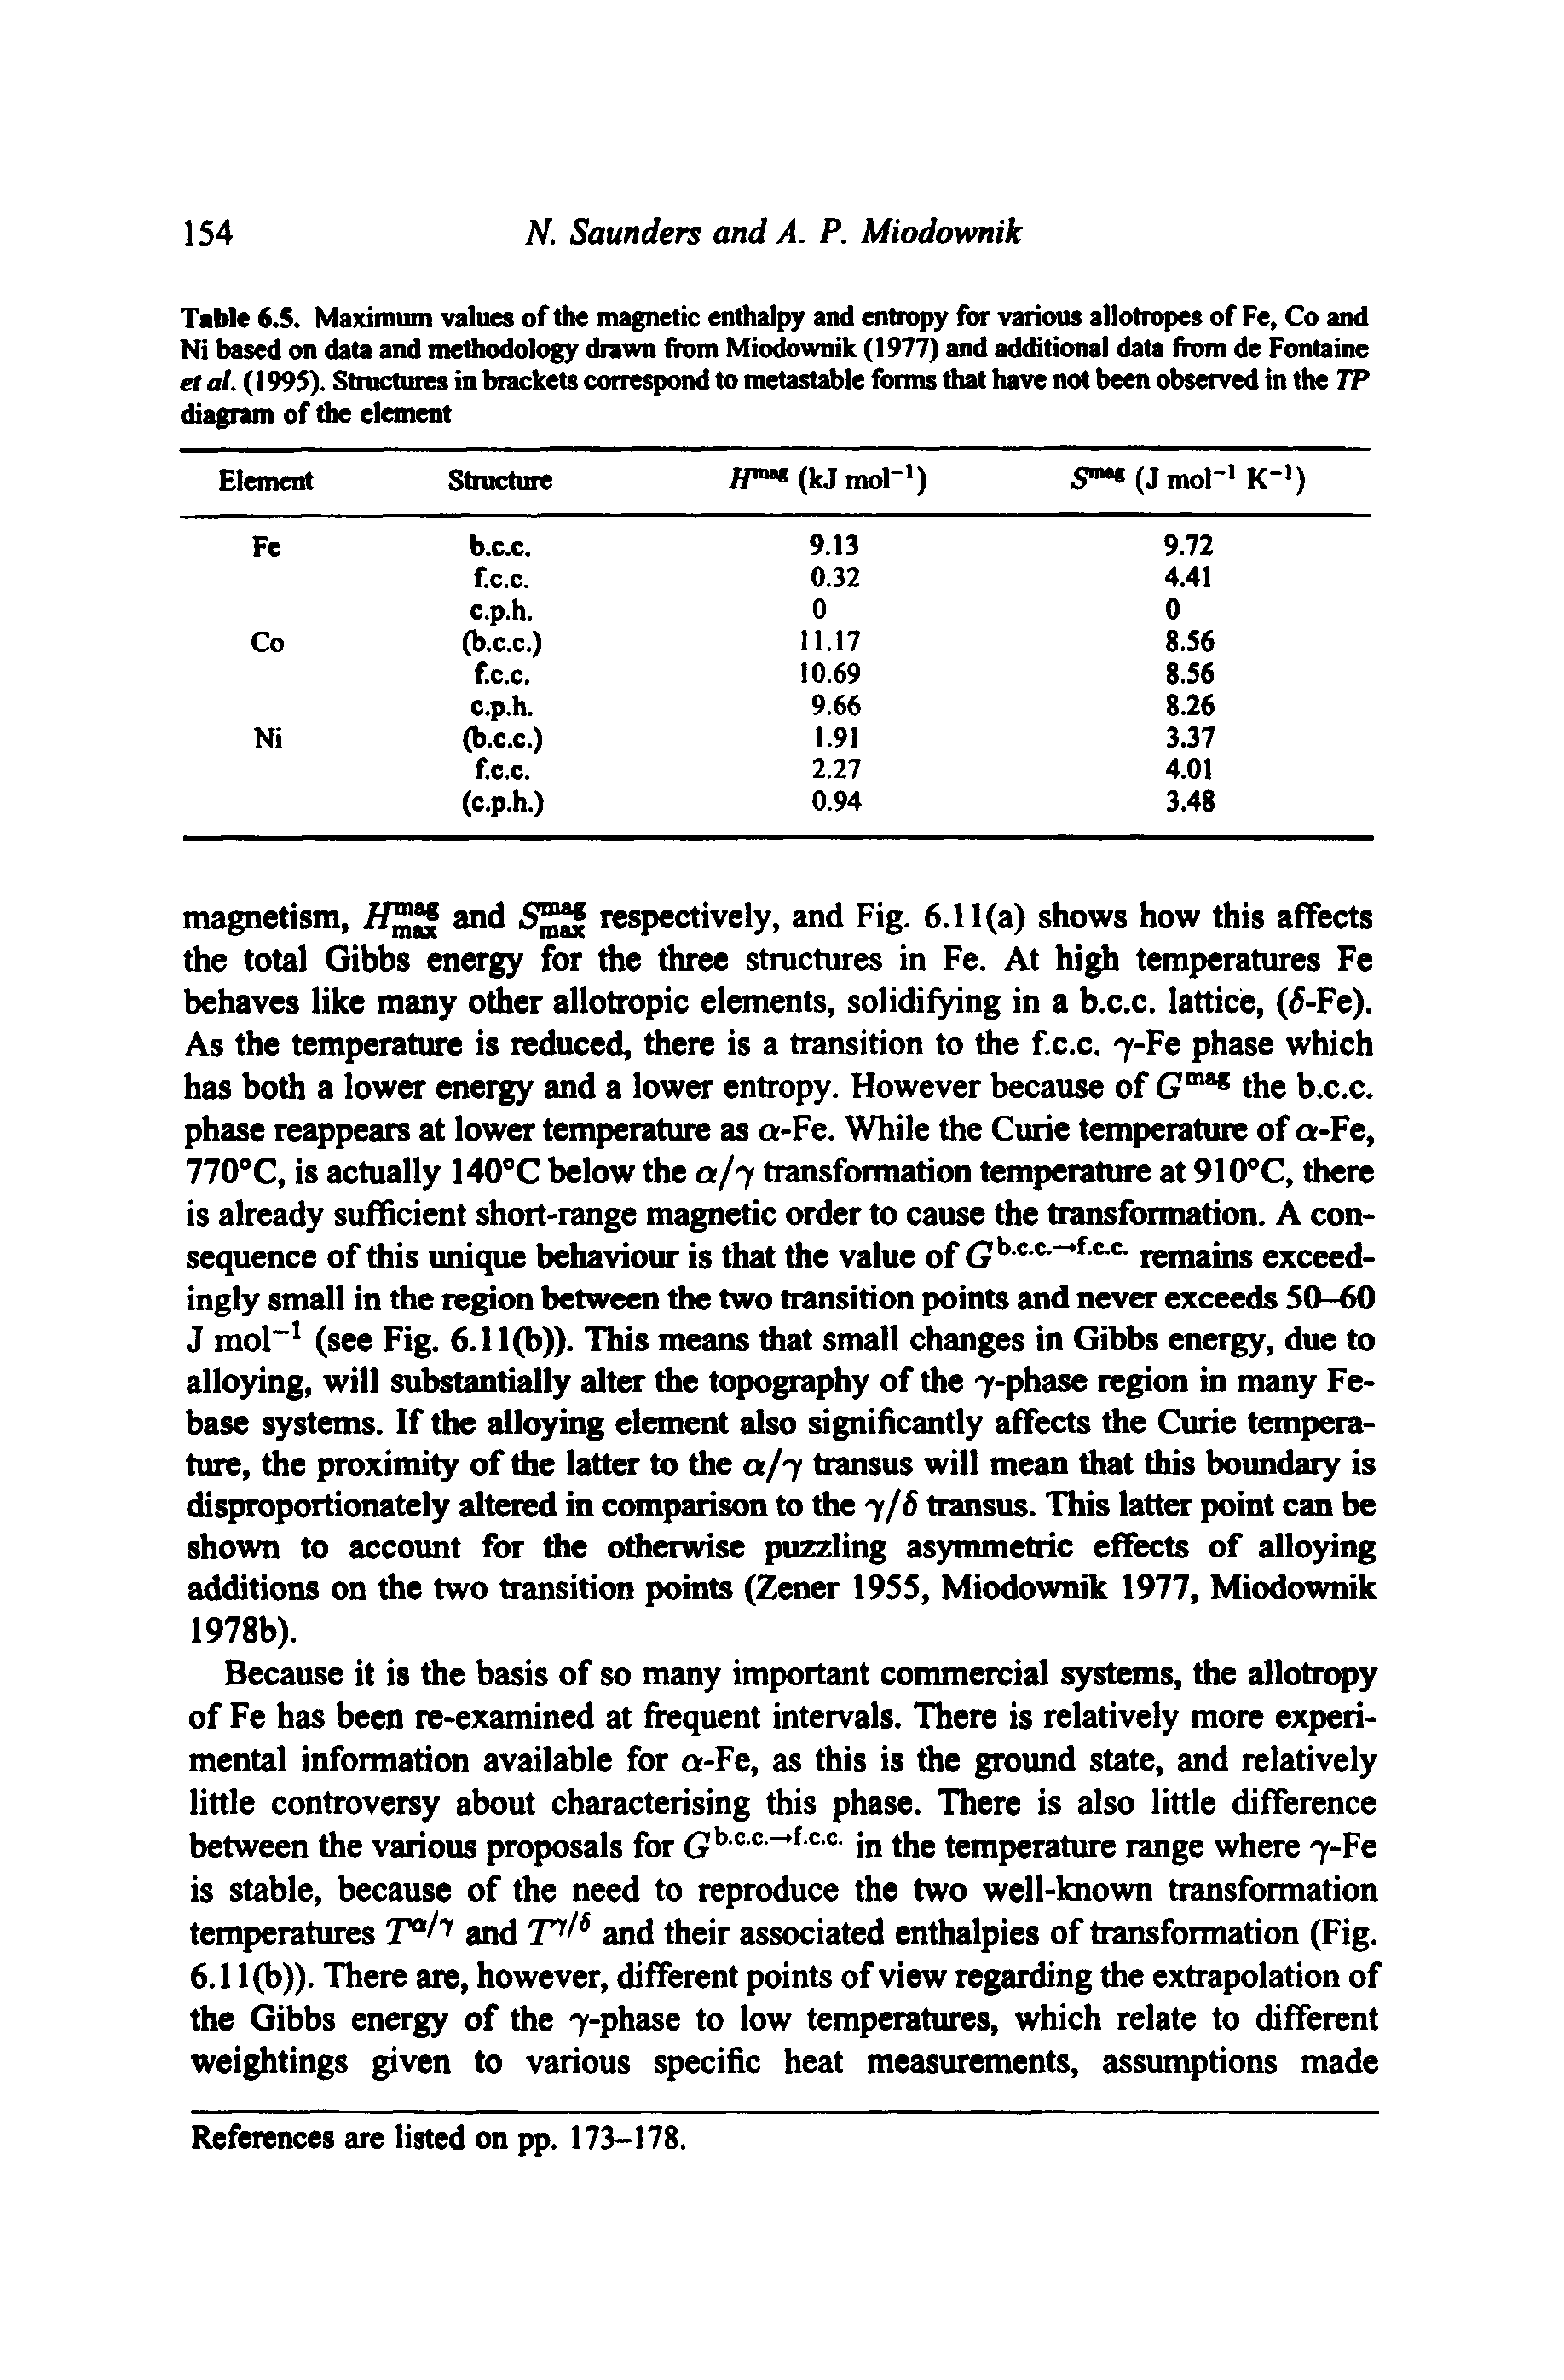 Table 6.5. Maximum values of the magnetic enthalpy and entropy for various allotropes of Fe, Co and Ni based on data and methodology drawn from Mio wnik (197 and additional data from de Fontaine el al. (1995). Structures in brackets correspond to metastable forms that have not been observed in the TP diagram of the element...